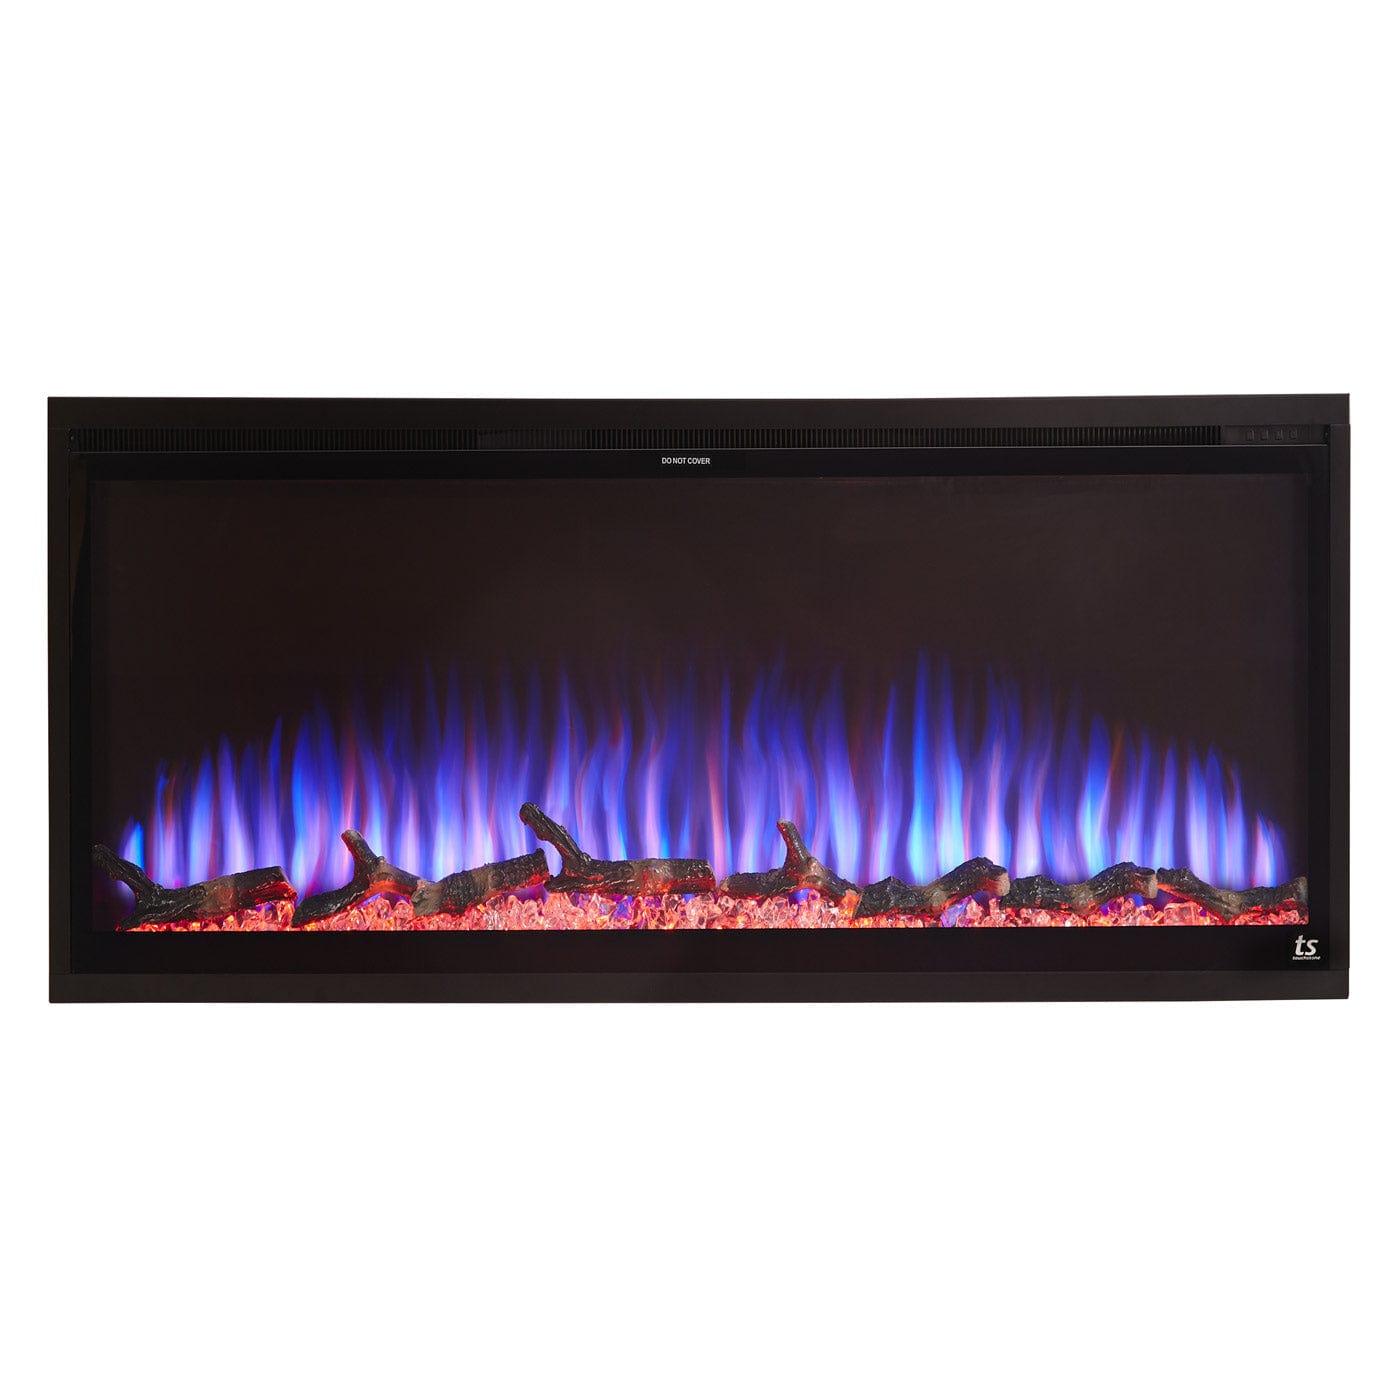 Touchstone Sideline Elite 42 80042 Smart Electric Fireplace shown with blue and red flames